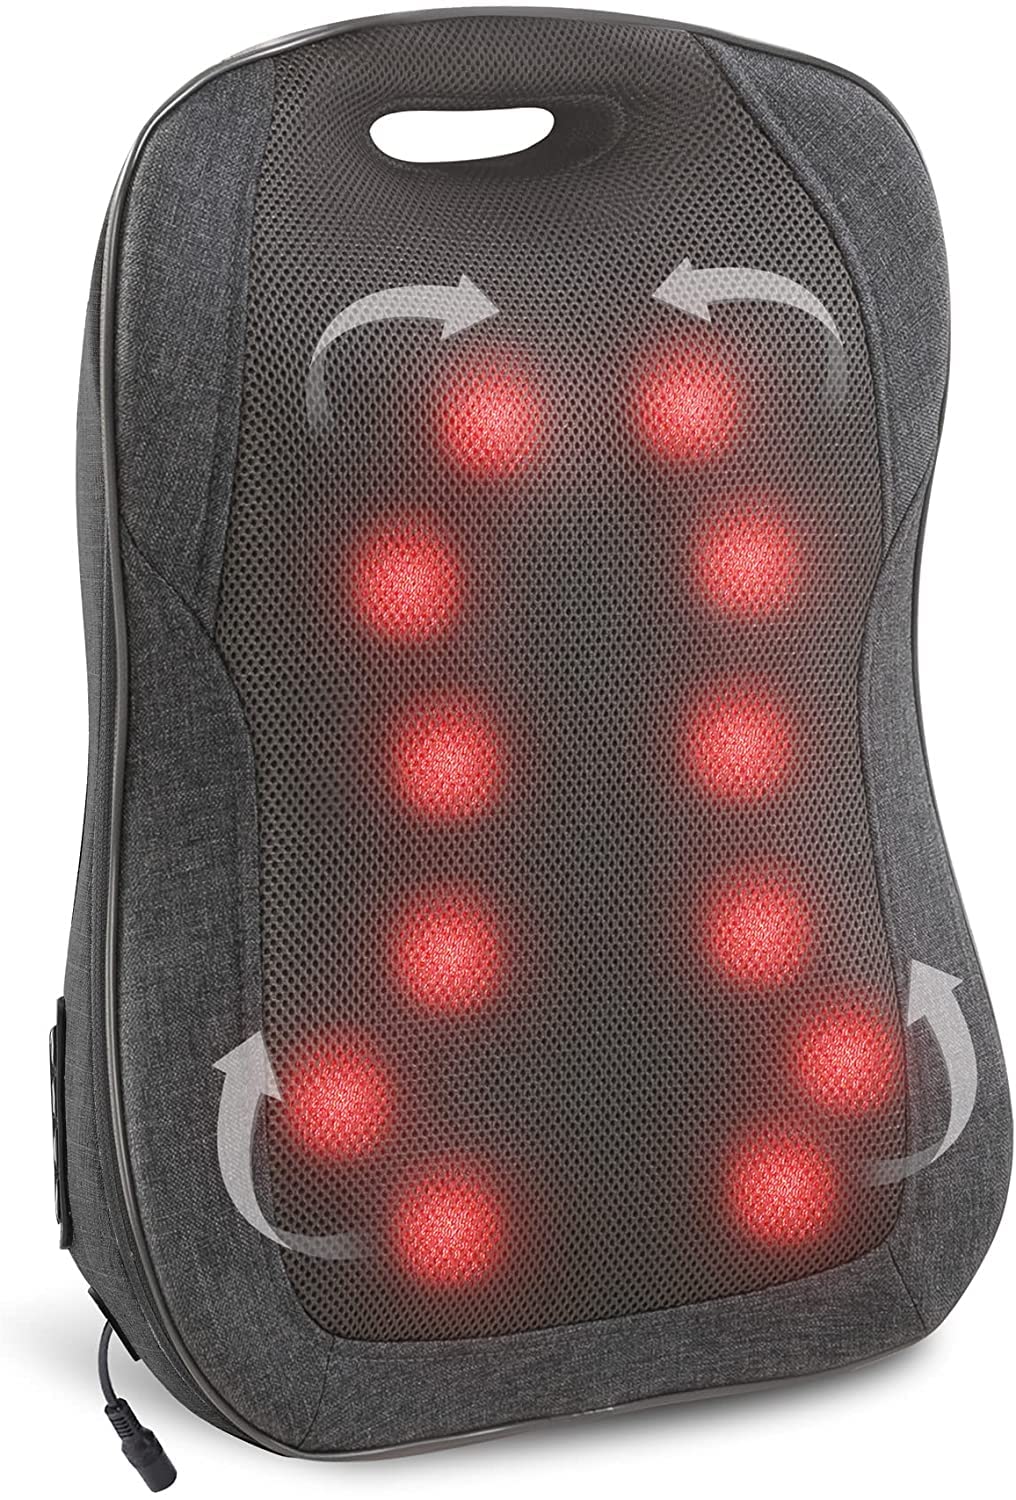 Comfier Back Massager with Heat, Shiatsu Neck and Shoulder